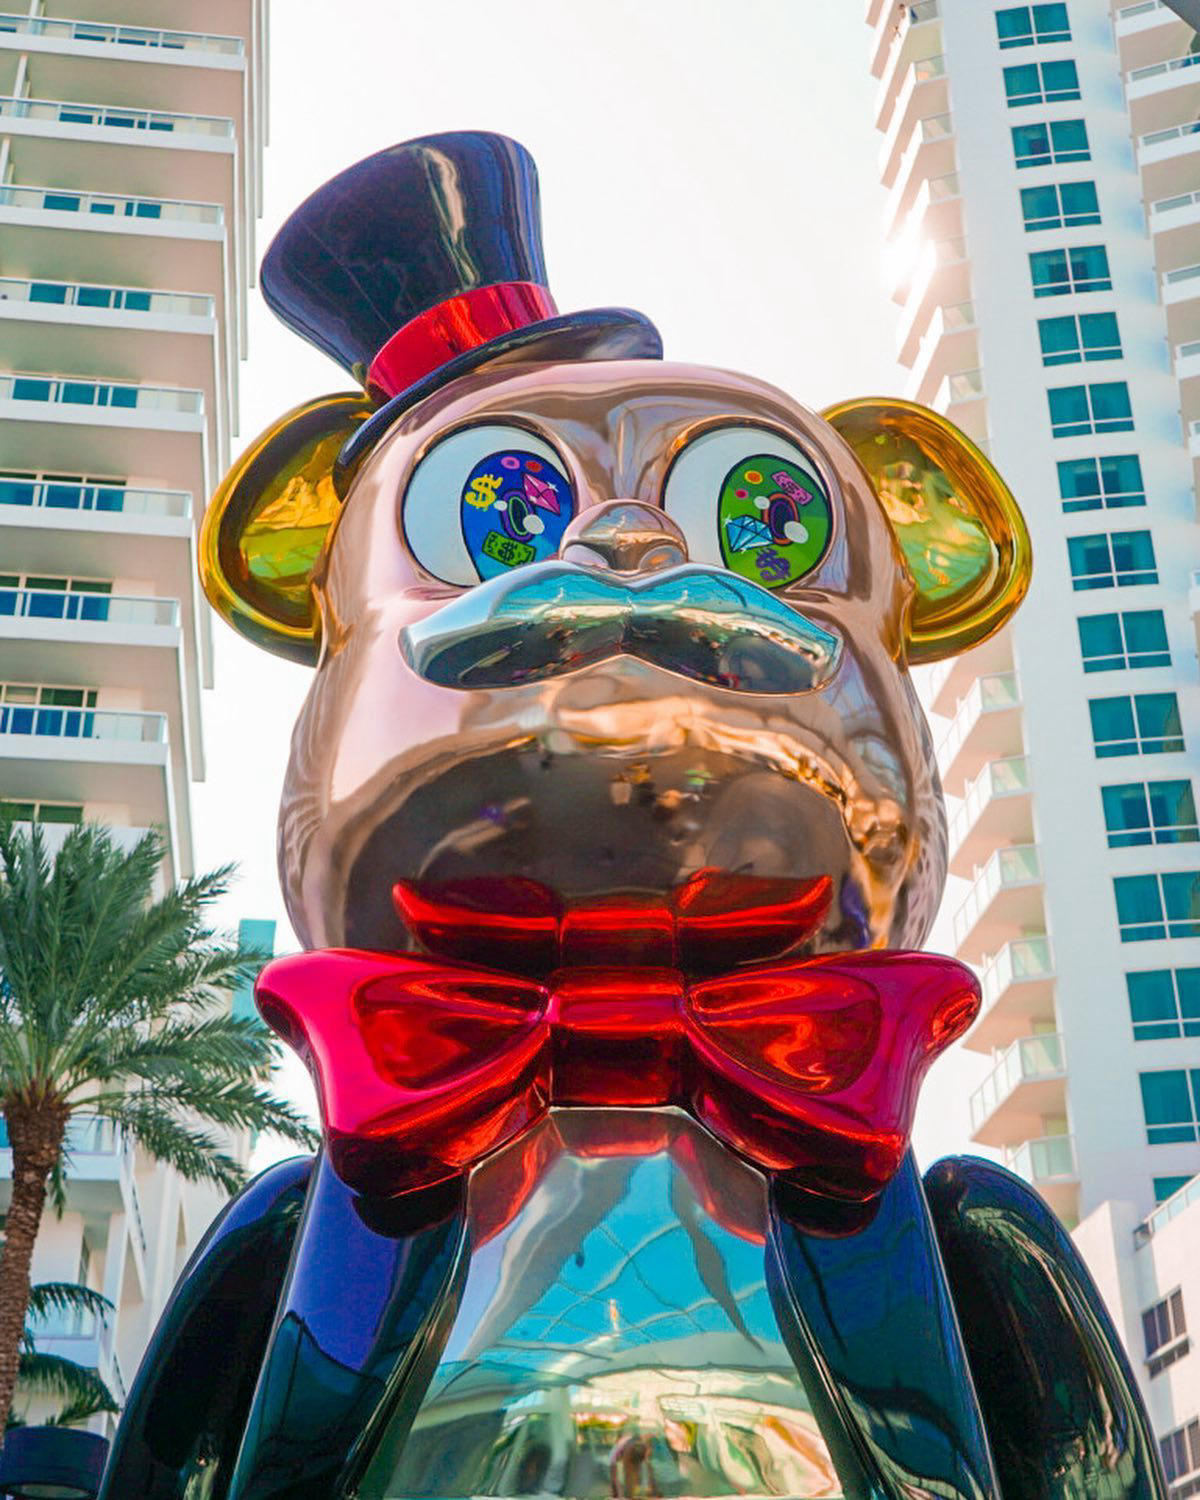 Fontainebleau Miami Beach - And just like that, #ArtBasel has officially come to an end